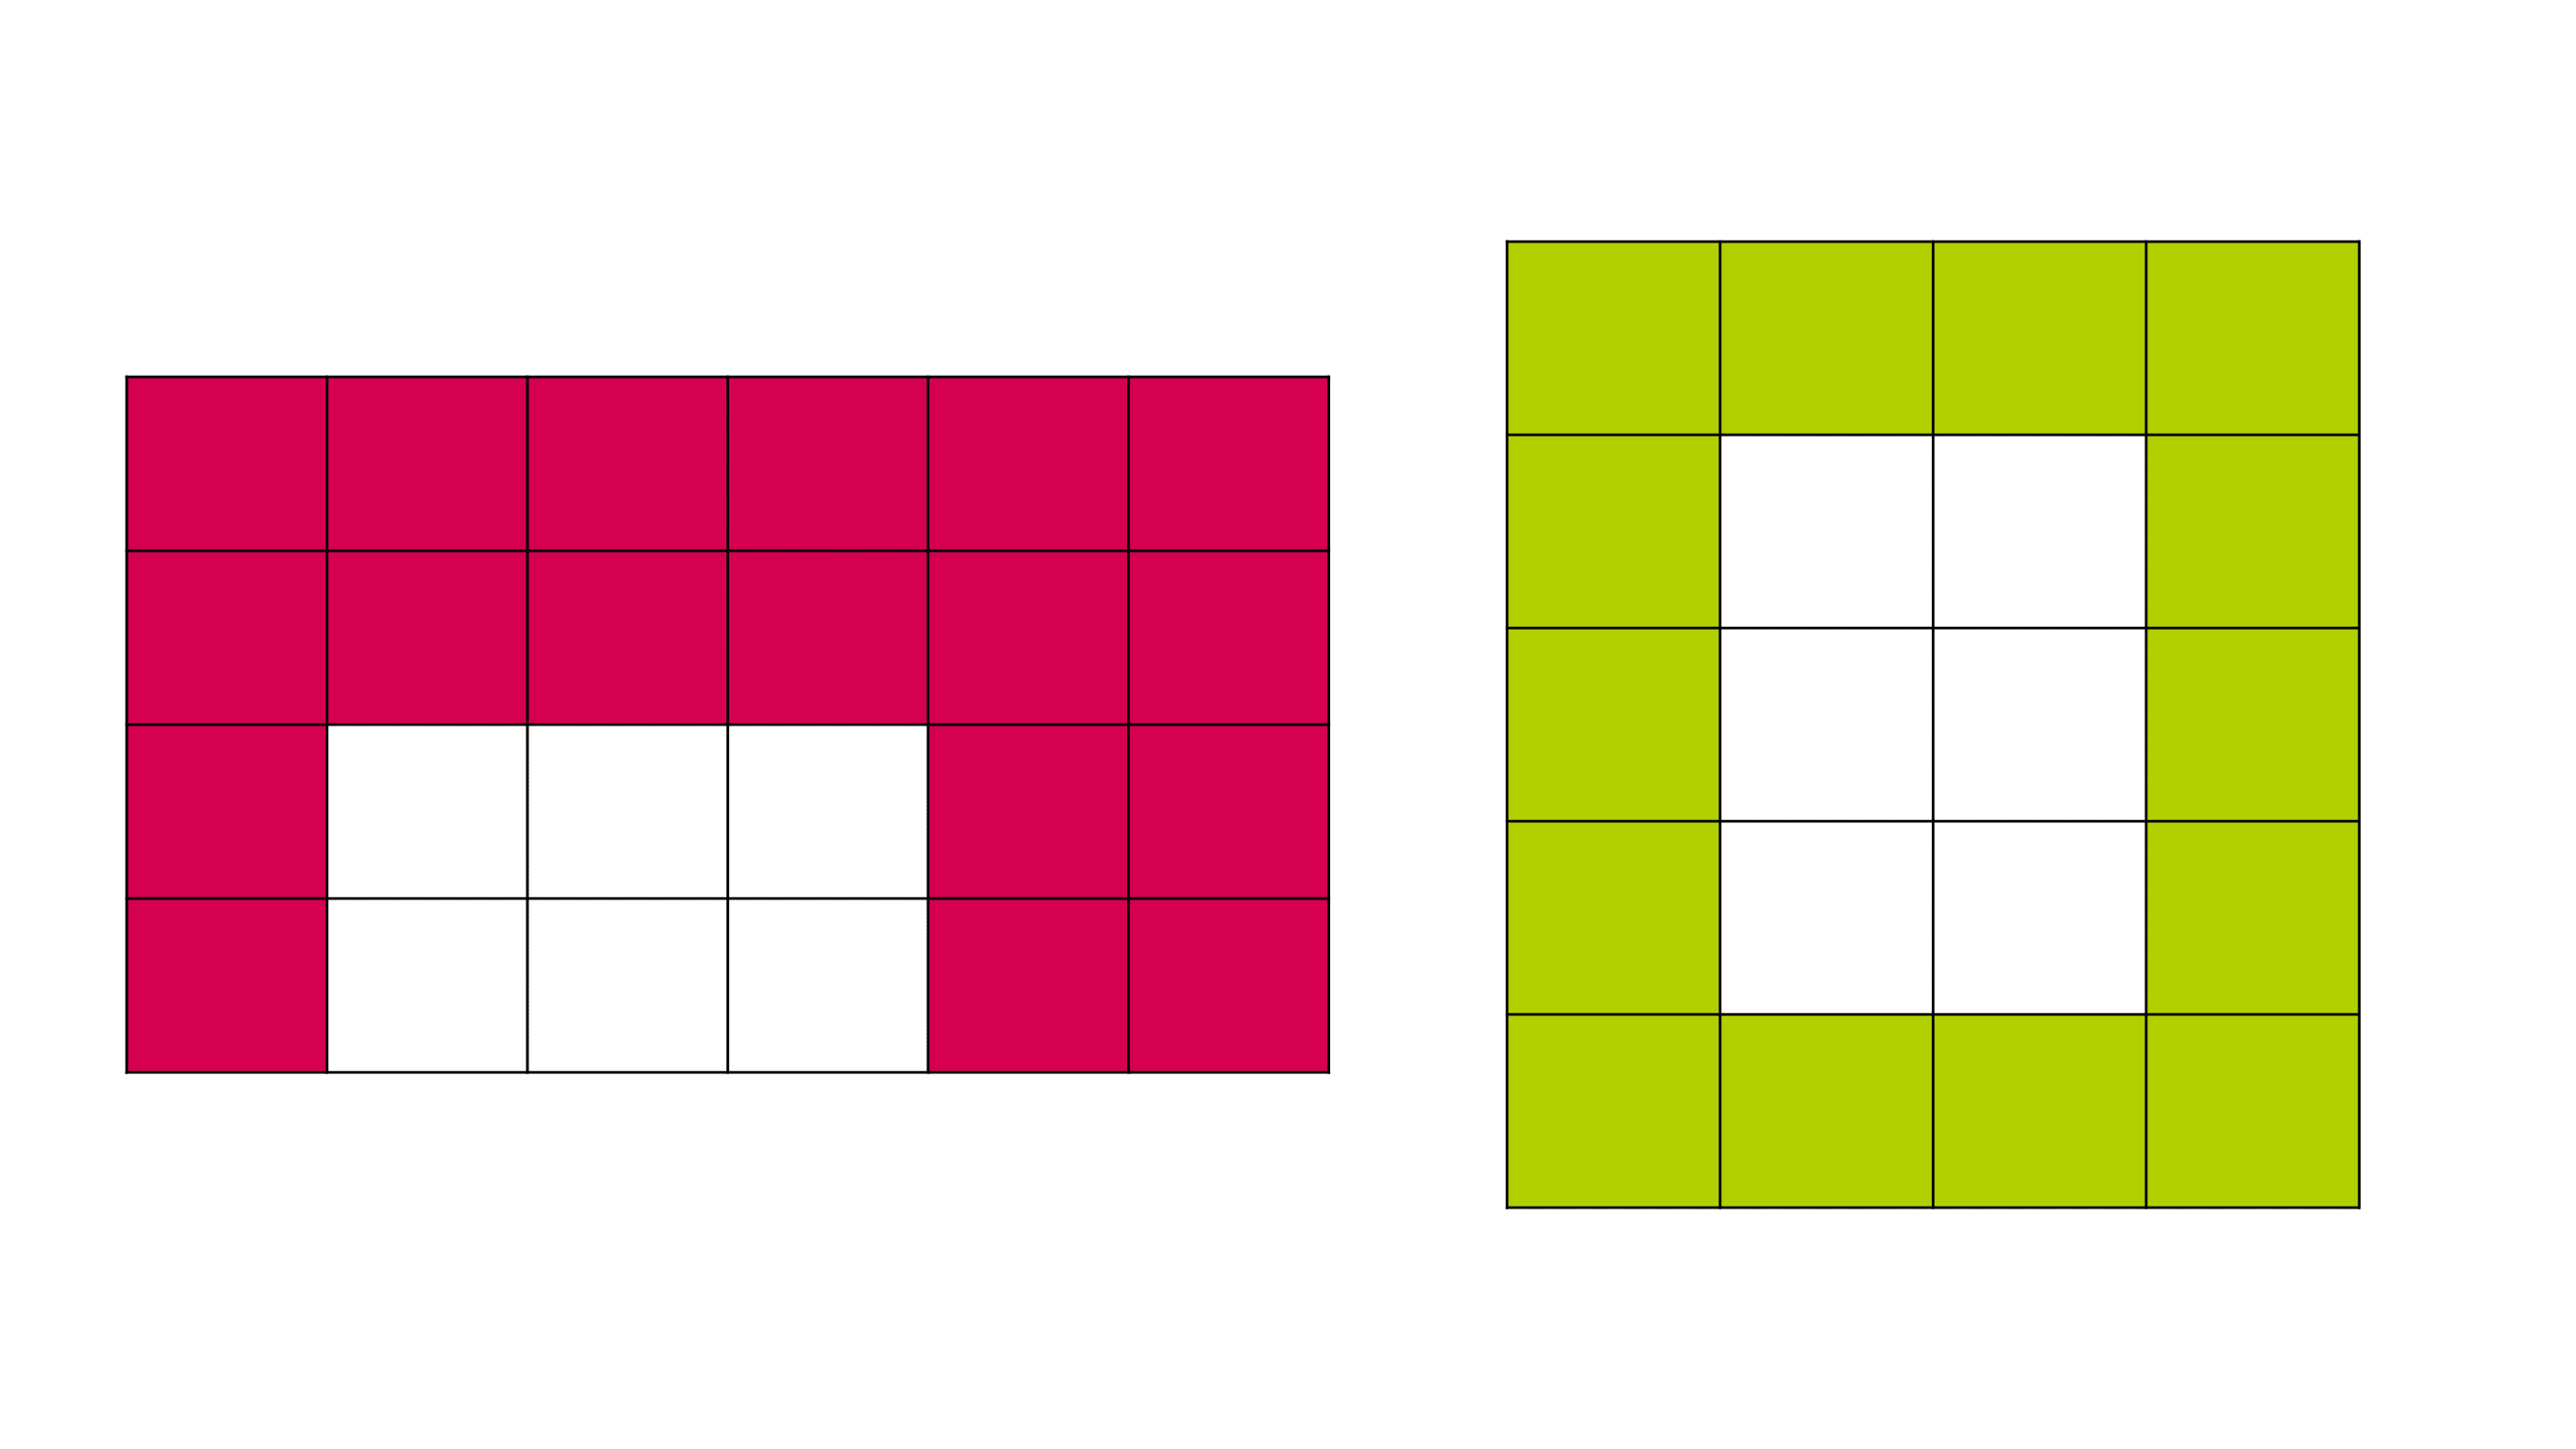 Are there more red squares or green squares?